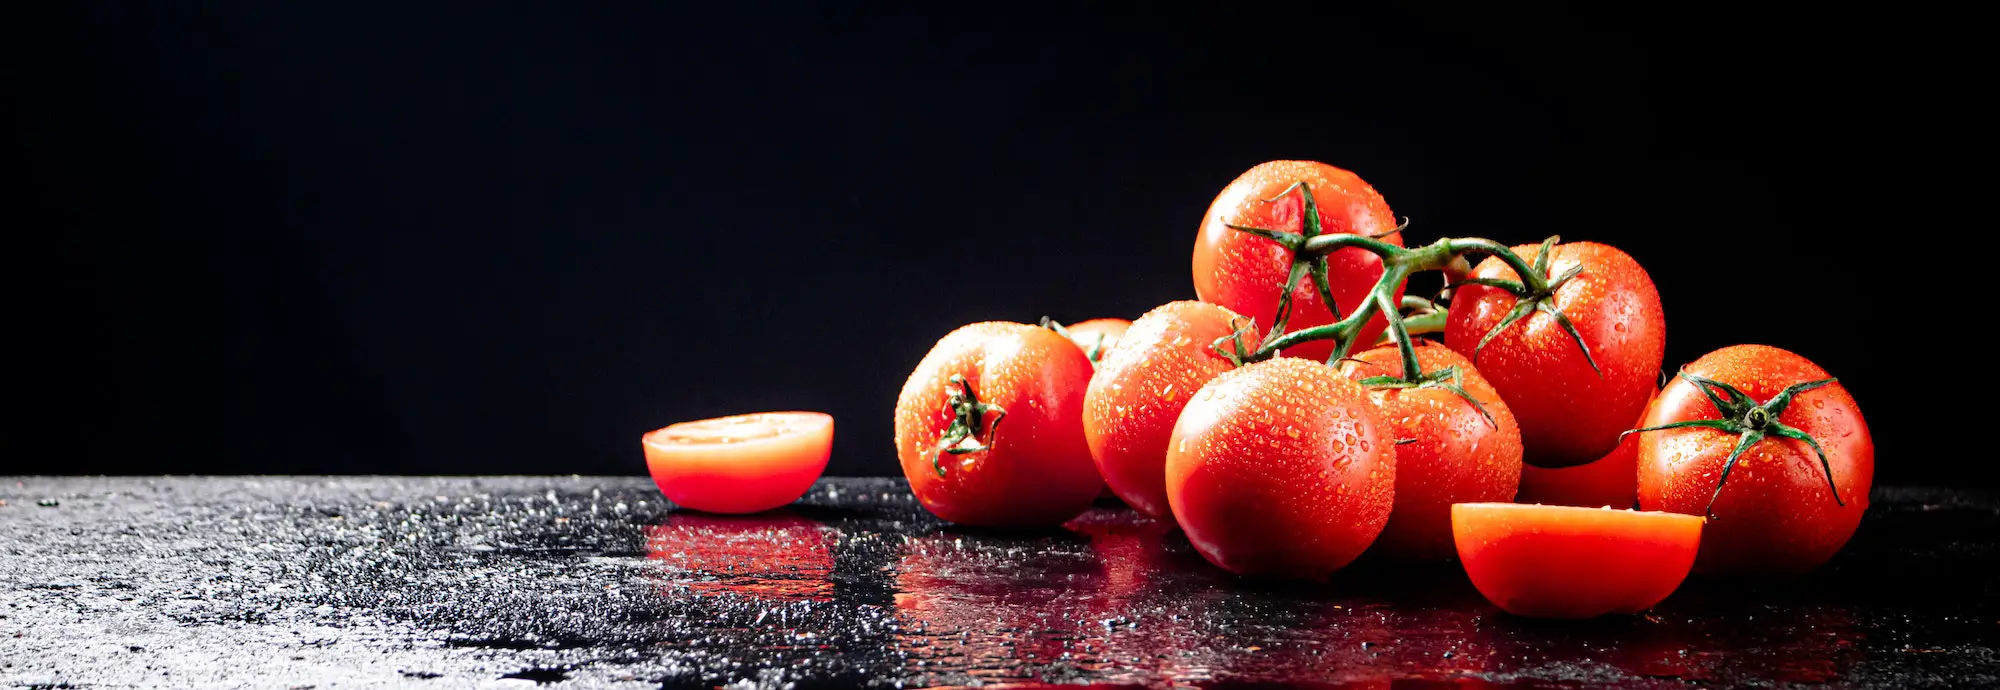 The Do’s and Don’ts of Vacuum Sealing Tomatoes